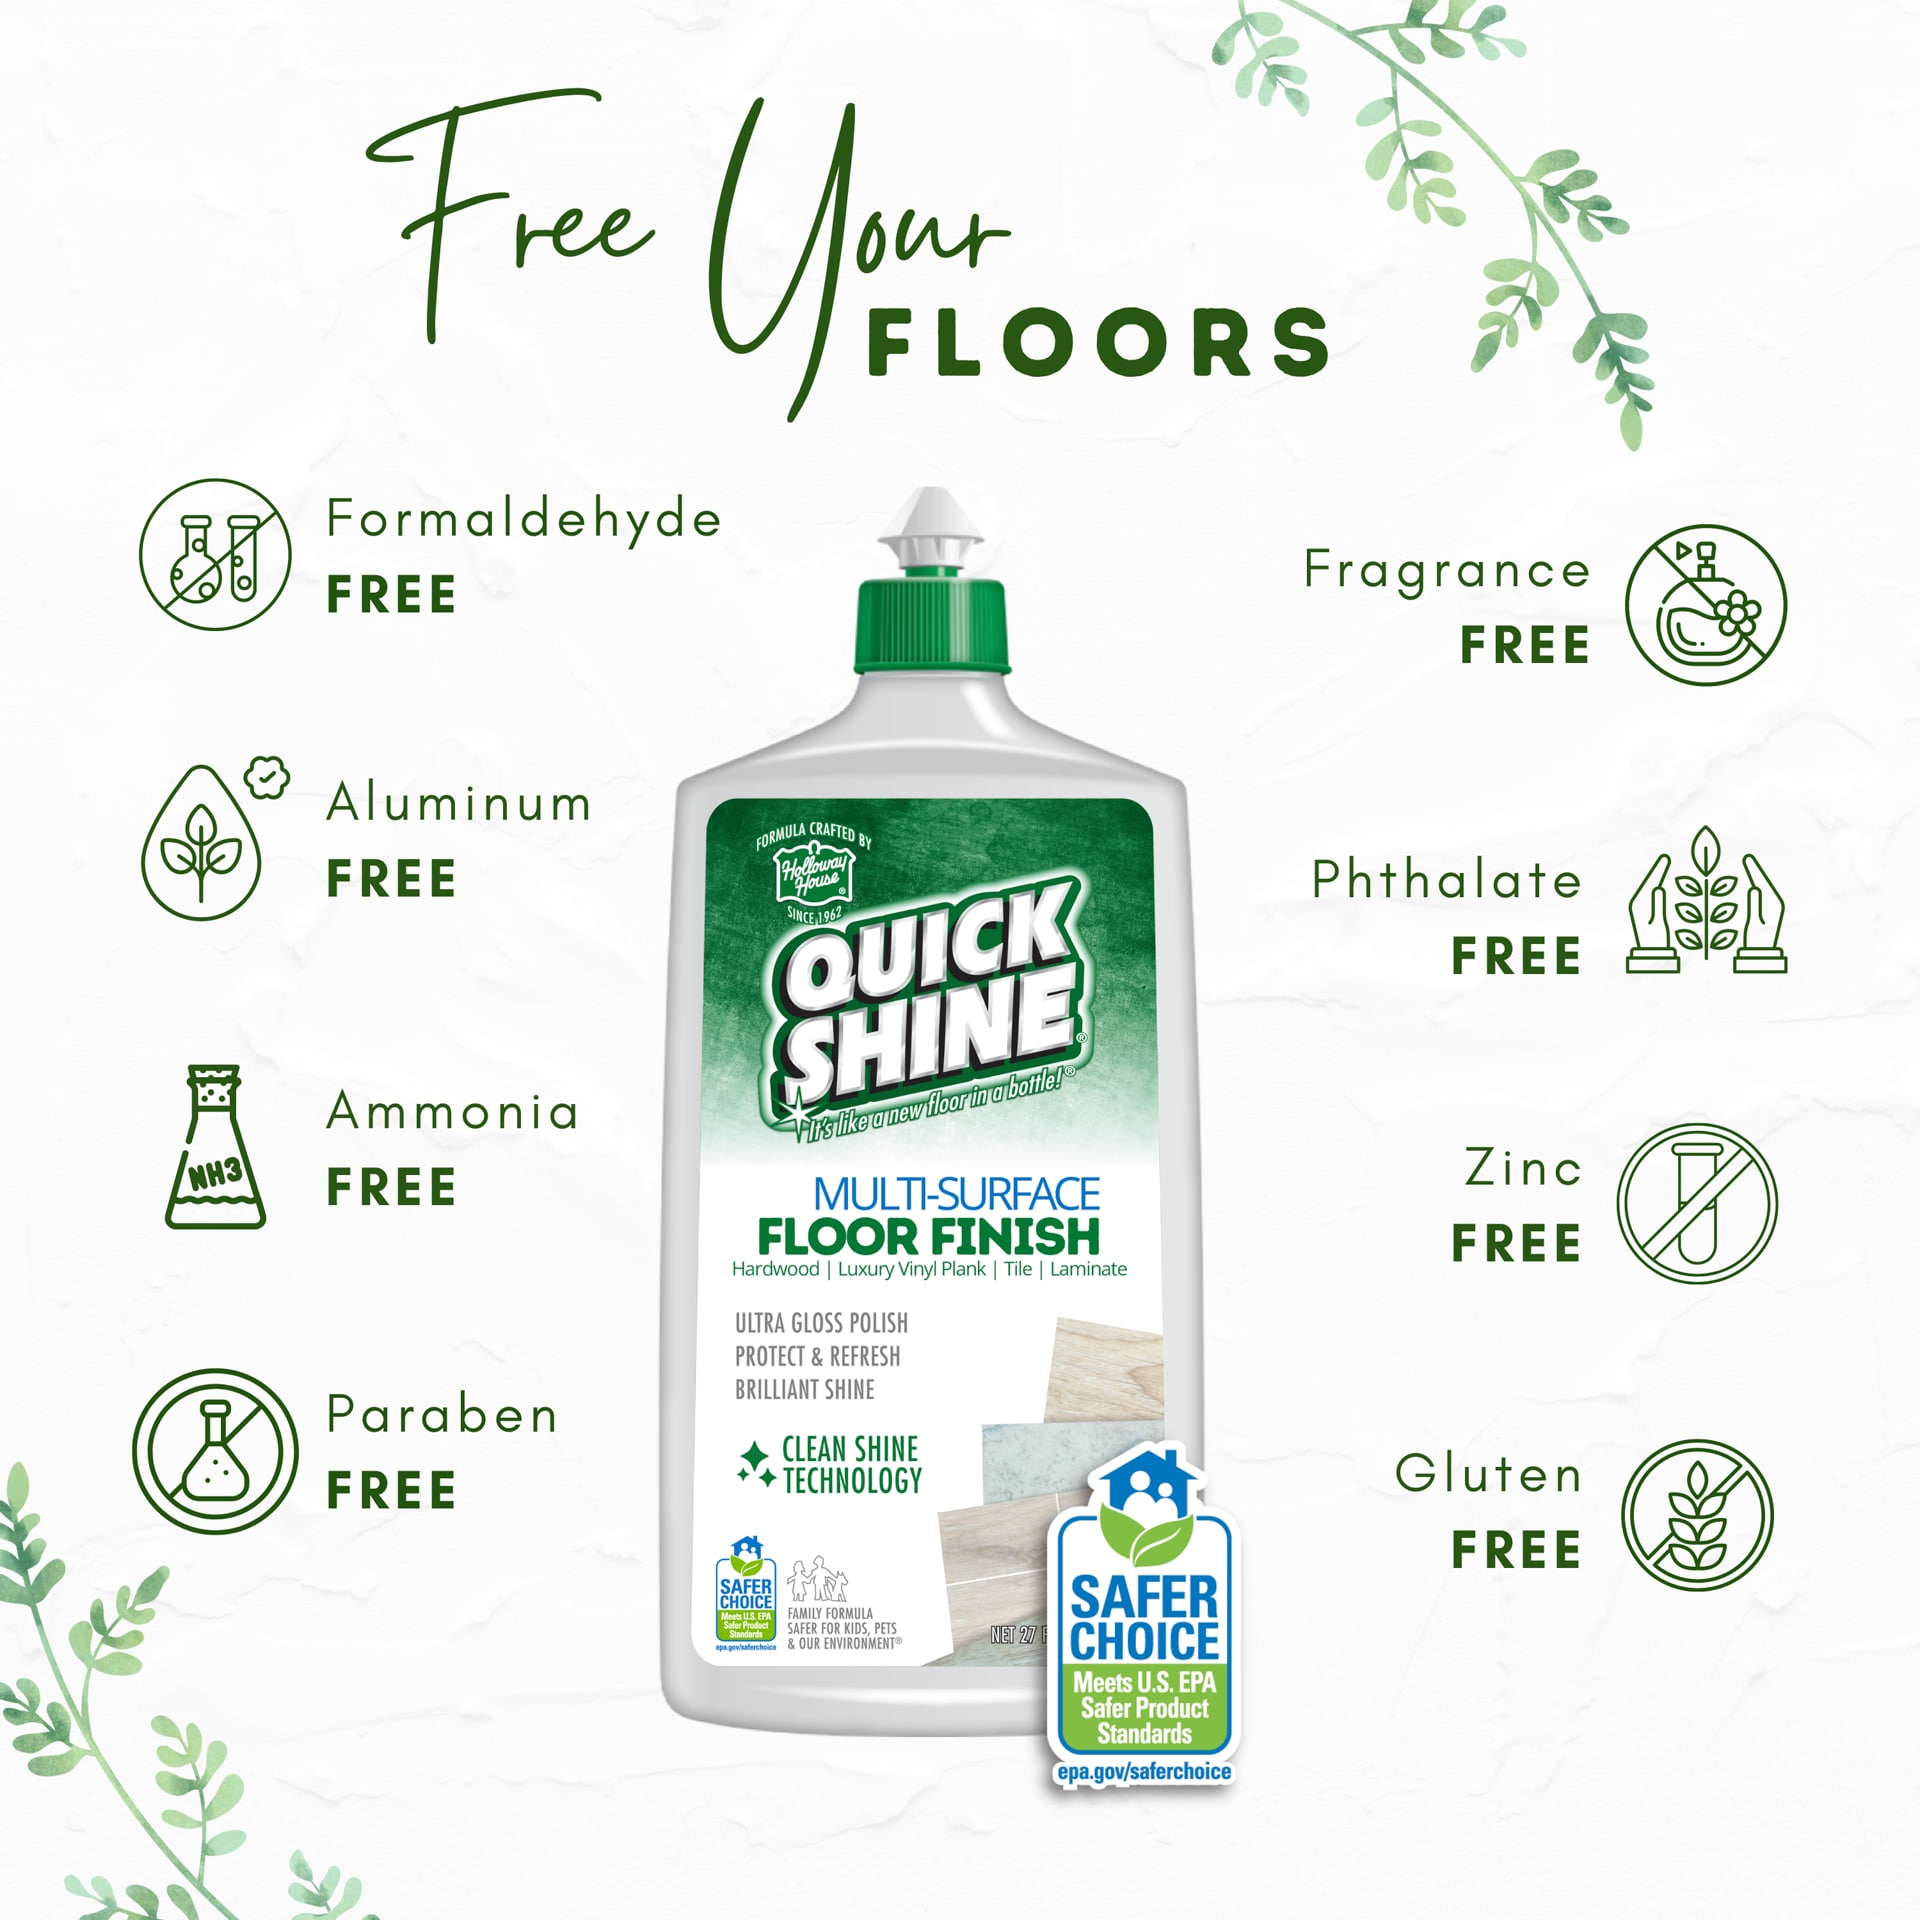 Quick Shine Floor Finish - 𝘽𝙚𝙛𝙤𝙧𝙚 𝙖𝙣𝙙 𝘼𝙛𝙩𝙚𝙧. The dull floor  you see has been buffed out and cleaned with the Holloway House Floor  Cleaner. Love the fragrance of the cleaner!!! The